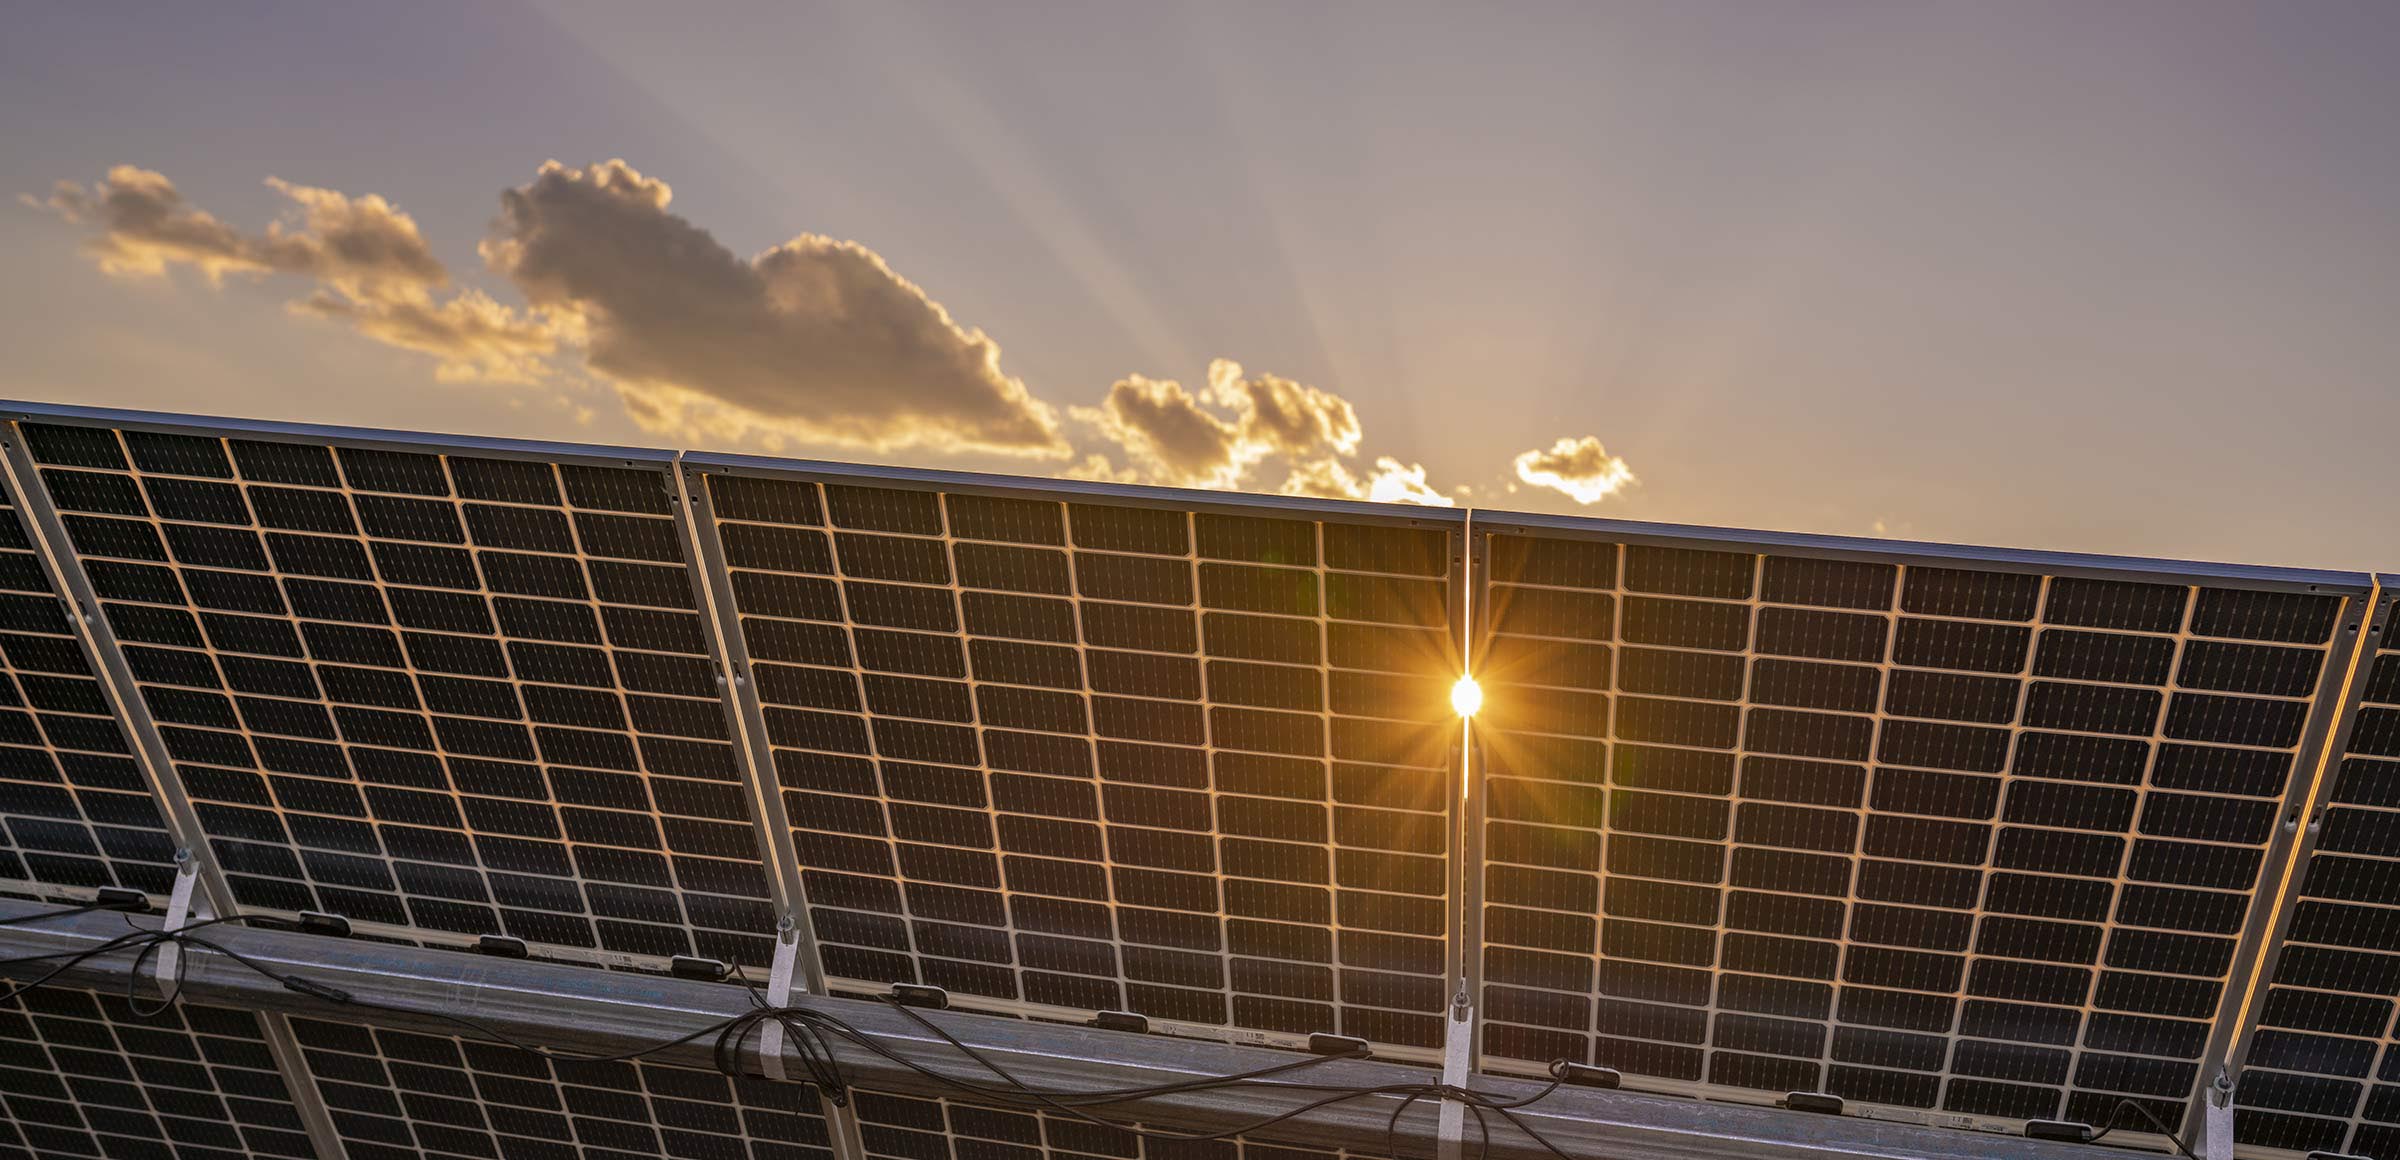 Sustainable solar panels: a new industrial frontier